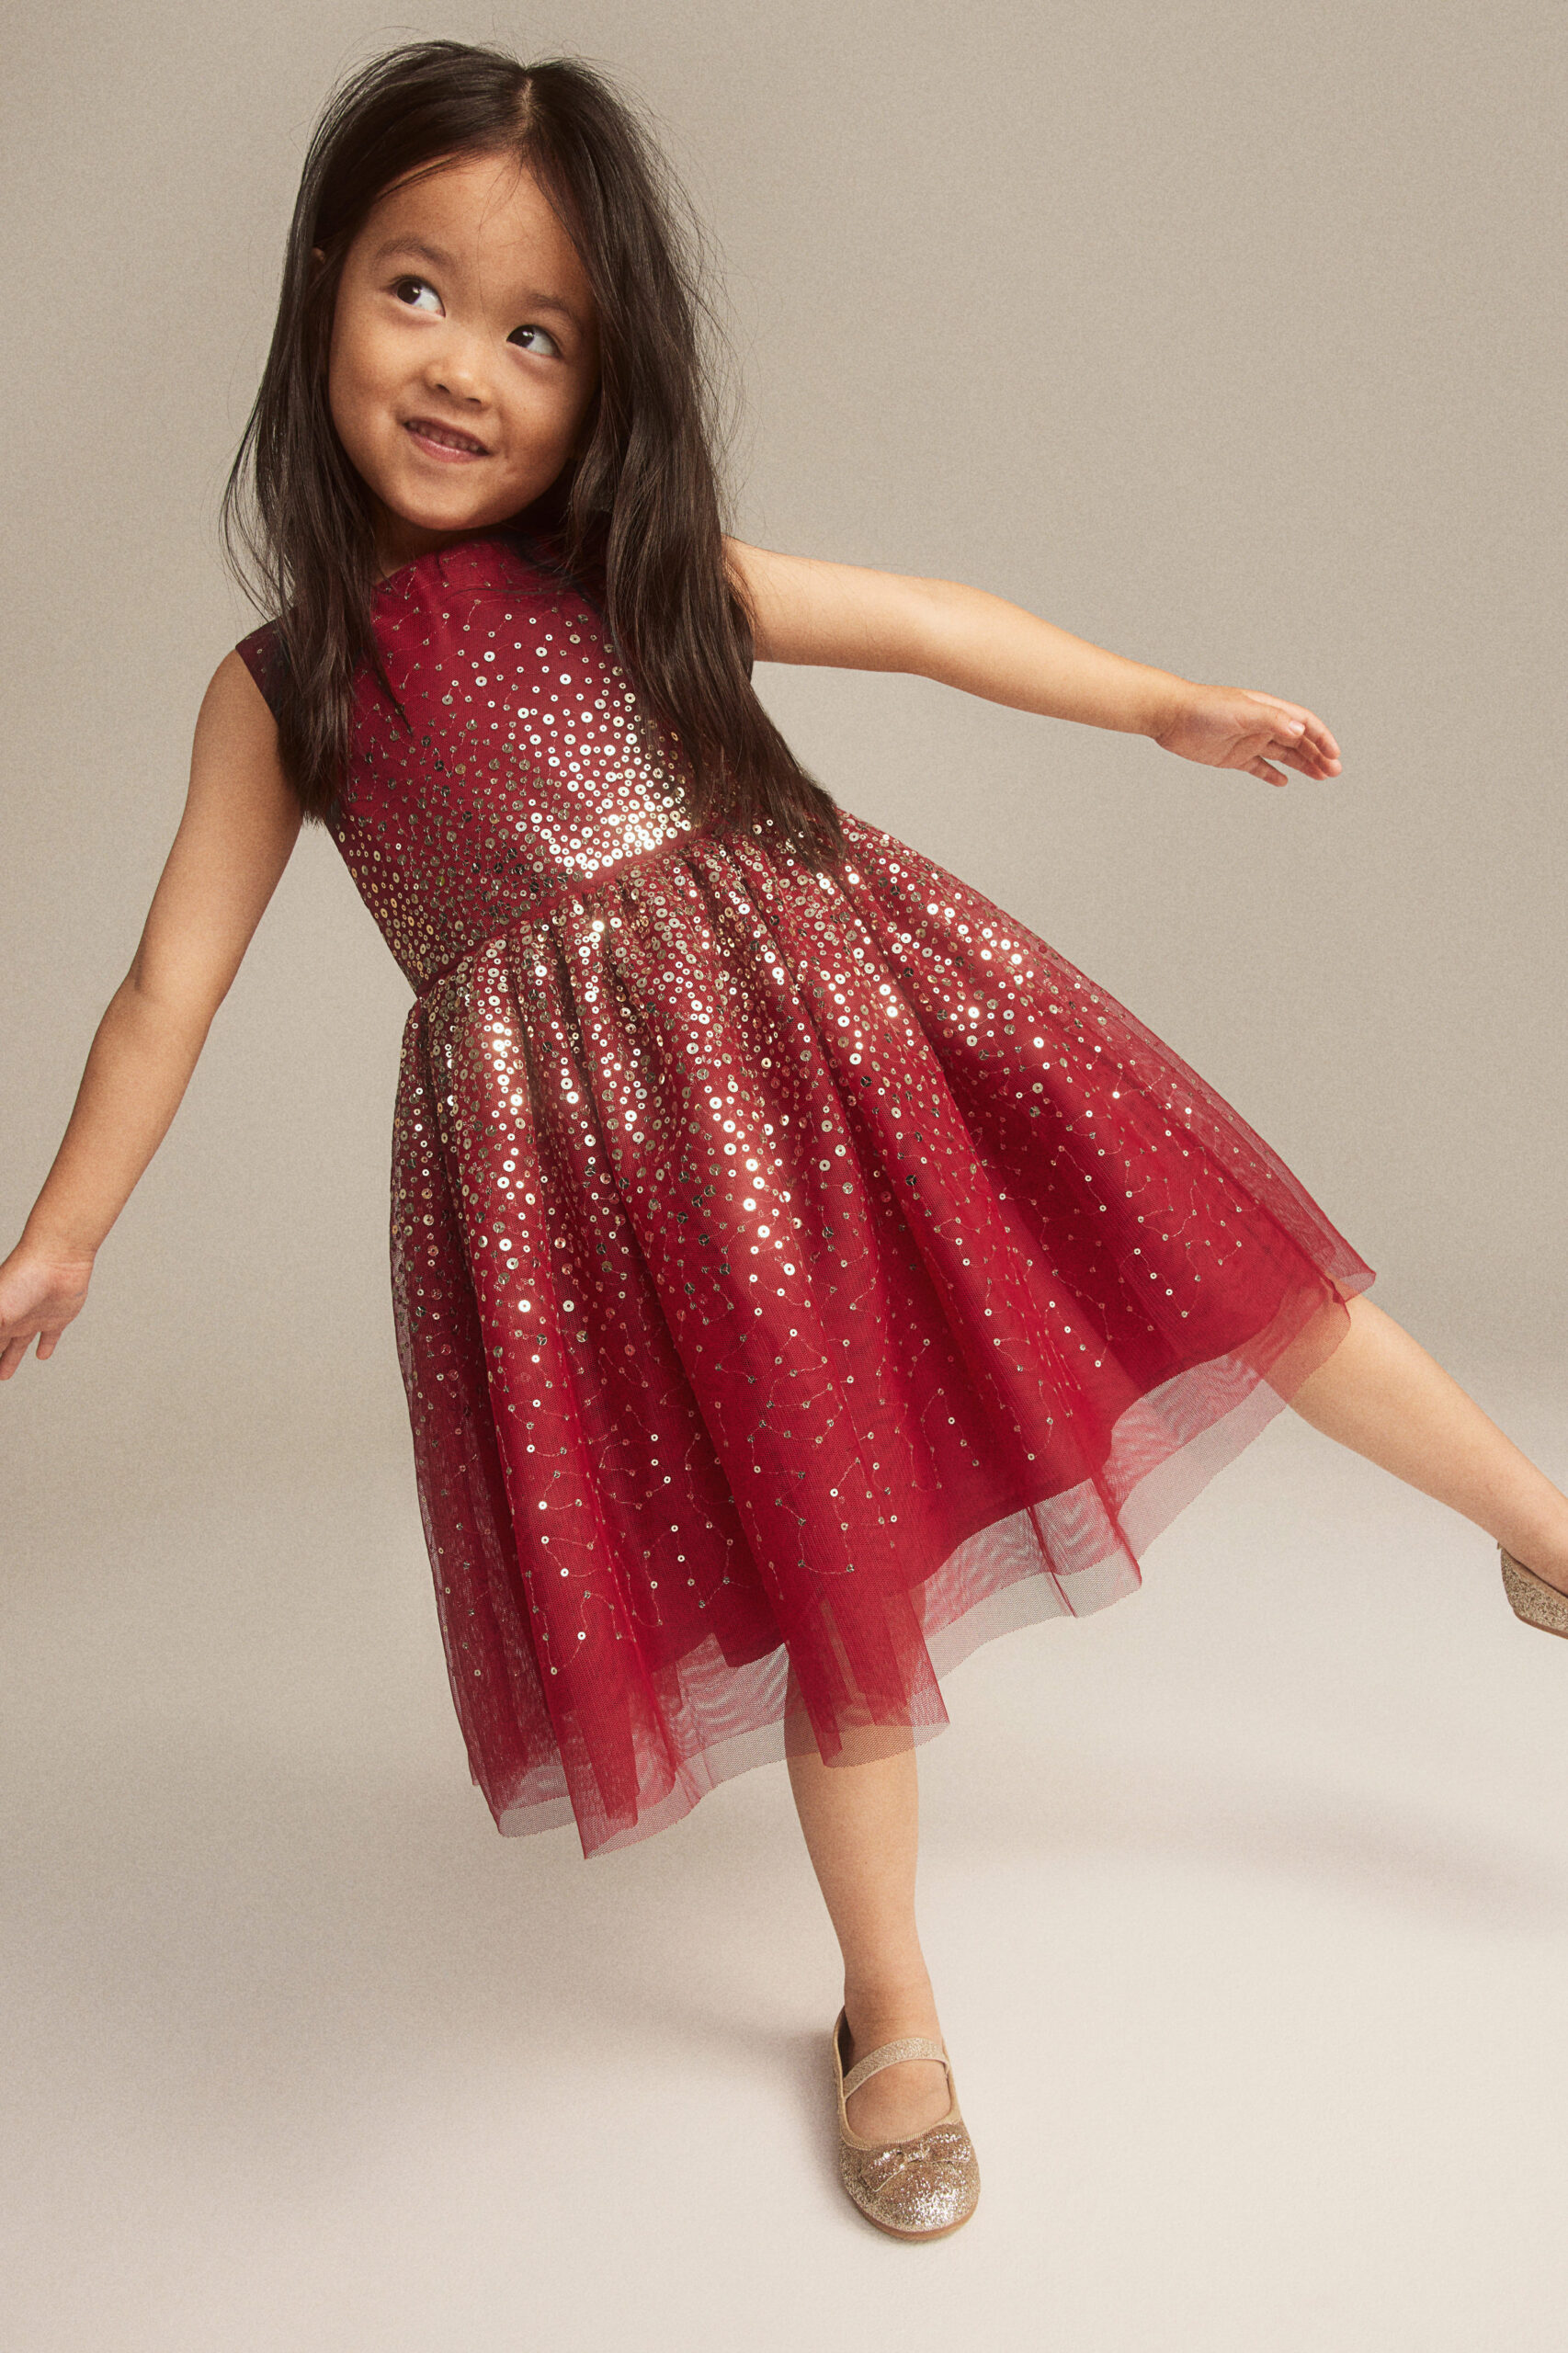 girl posing in red dress with gold sparkles and gold shoes